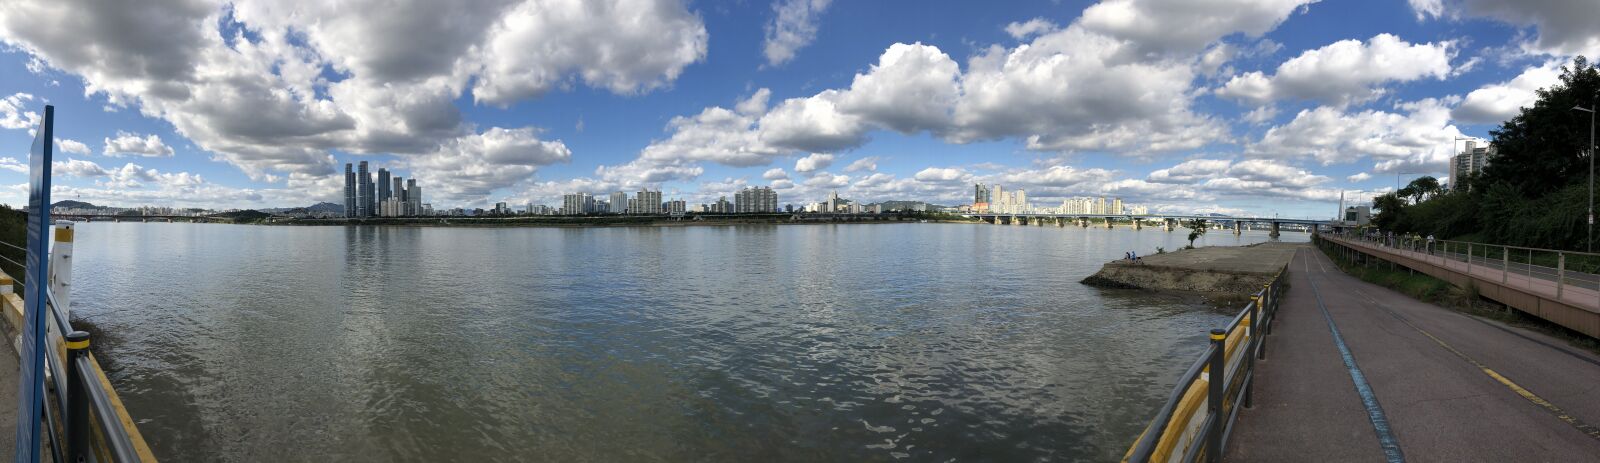 iPhone X back camera 4mm f/1.8 sample photo. River, panorama photography